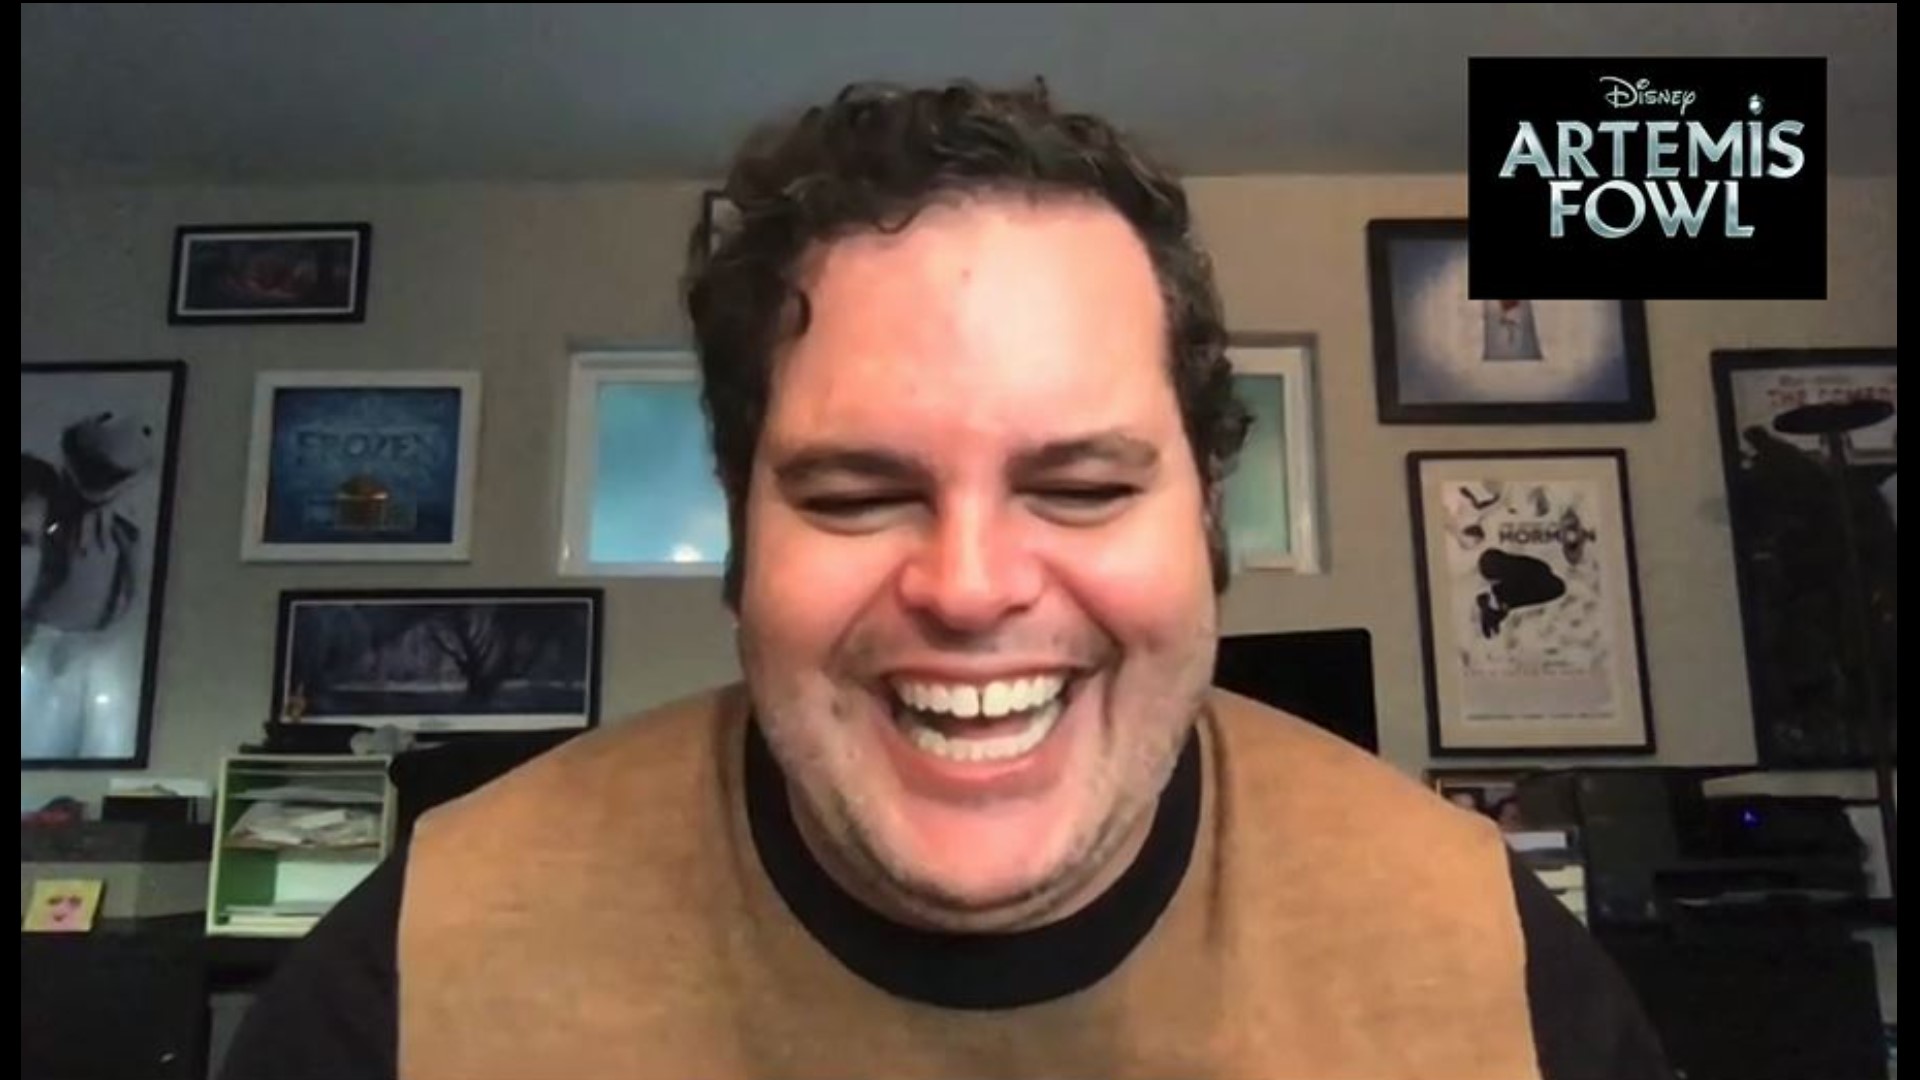 josh Gad On His Latest Disney Role Youtube Reunions And The Pandemics Silver Lining King5com